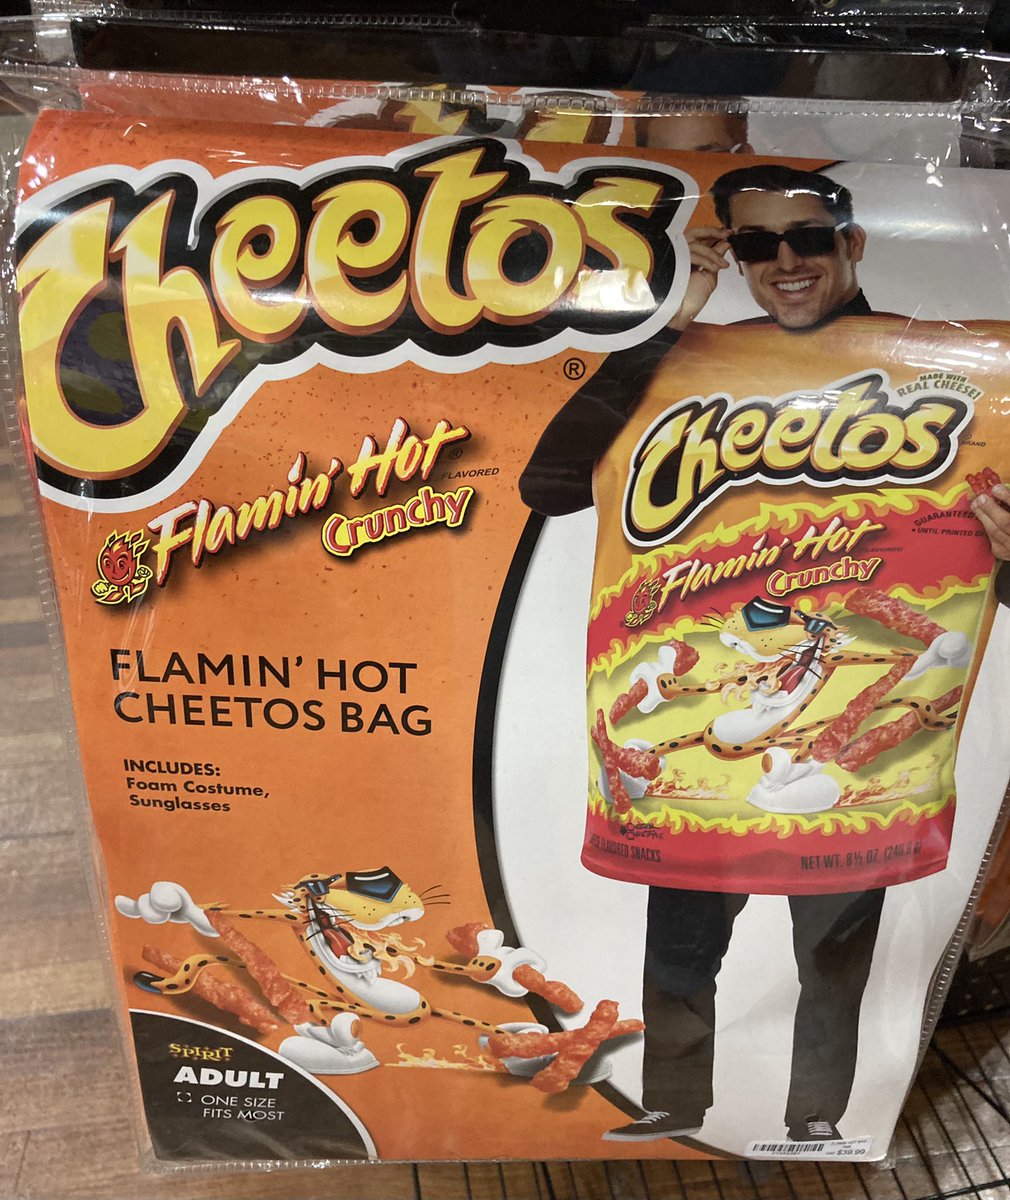 be Flamin Hot Cheetos for Halloween, you have not one but two options (bag ...